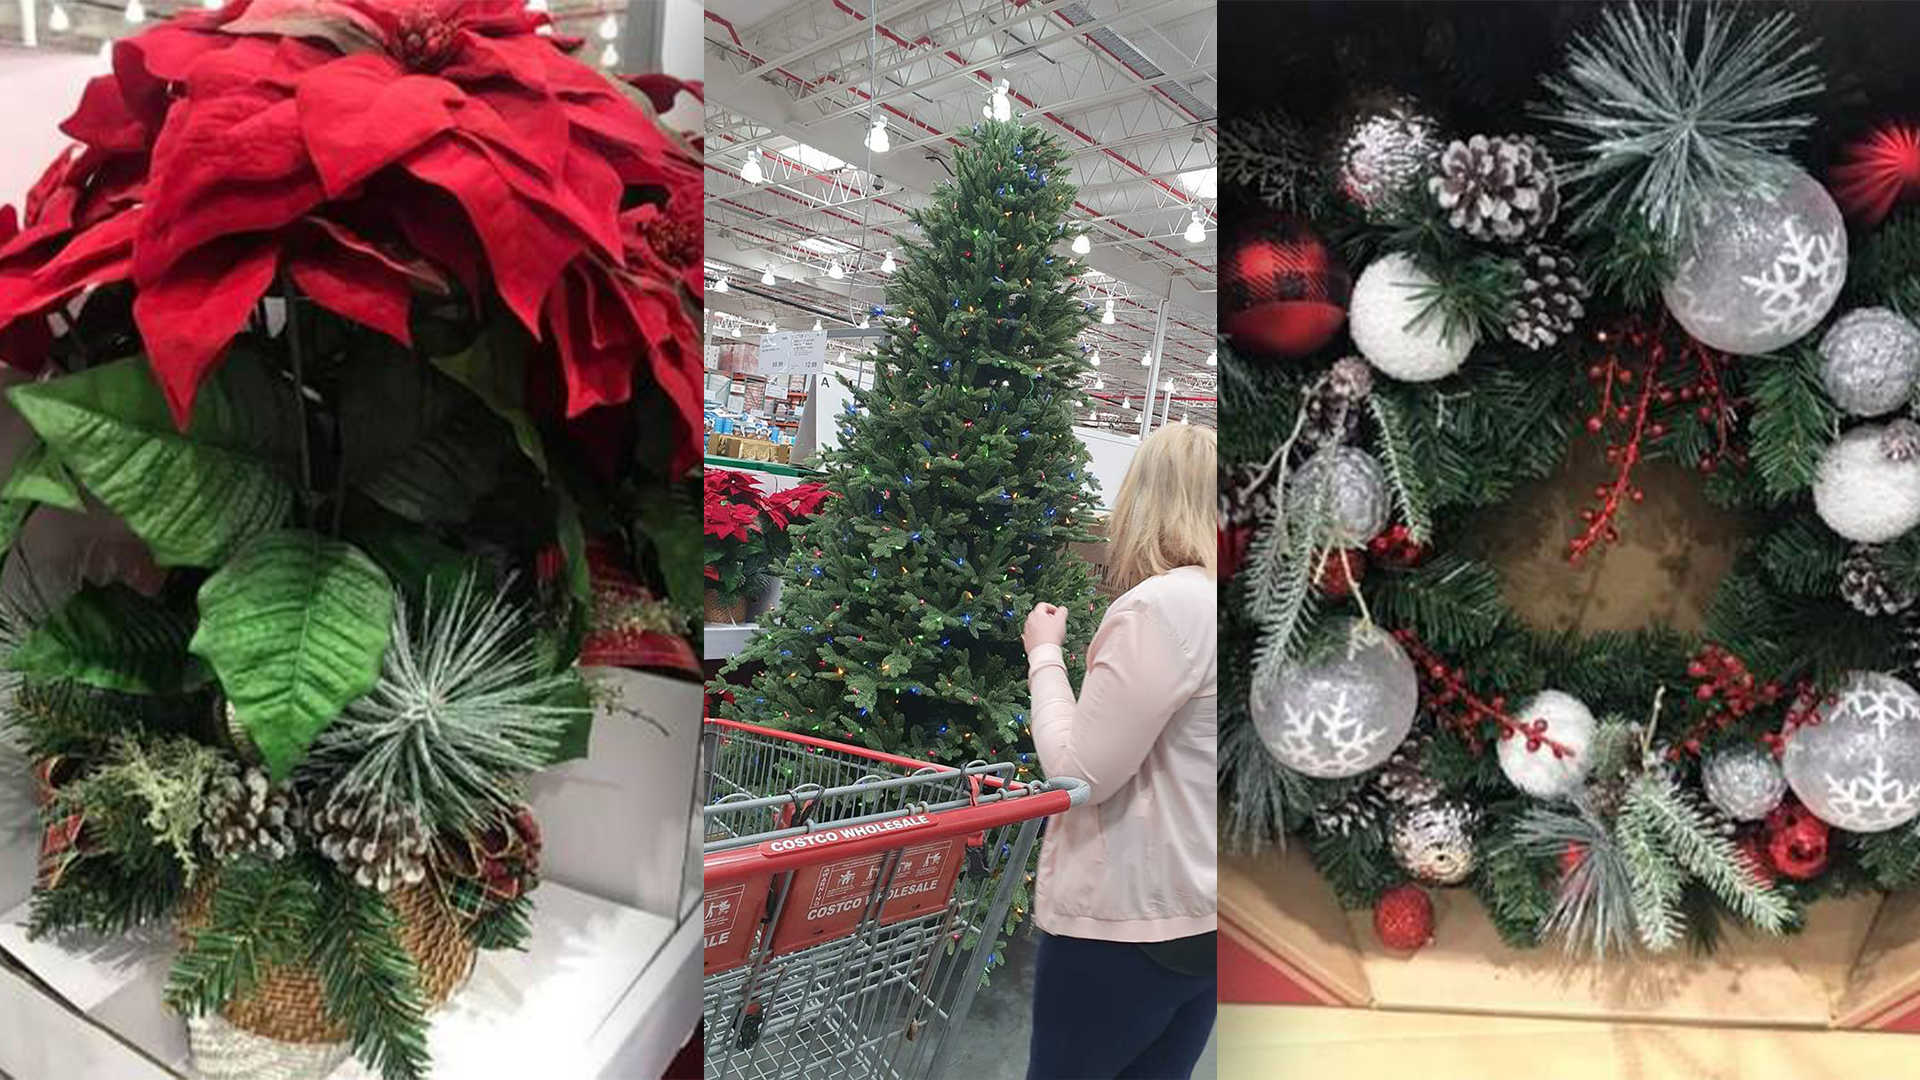 Costco Is Already Selling Christmas Decorations & It's Not Even September Yet